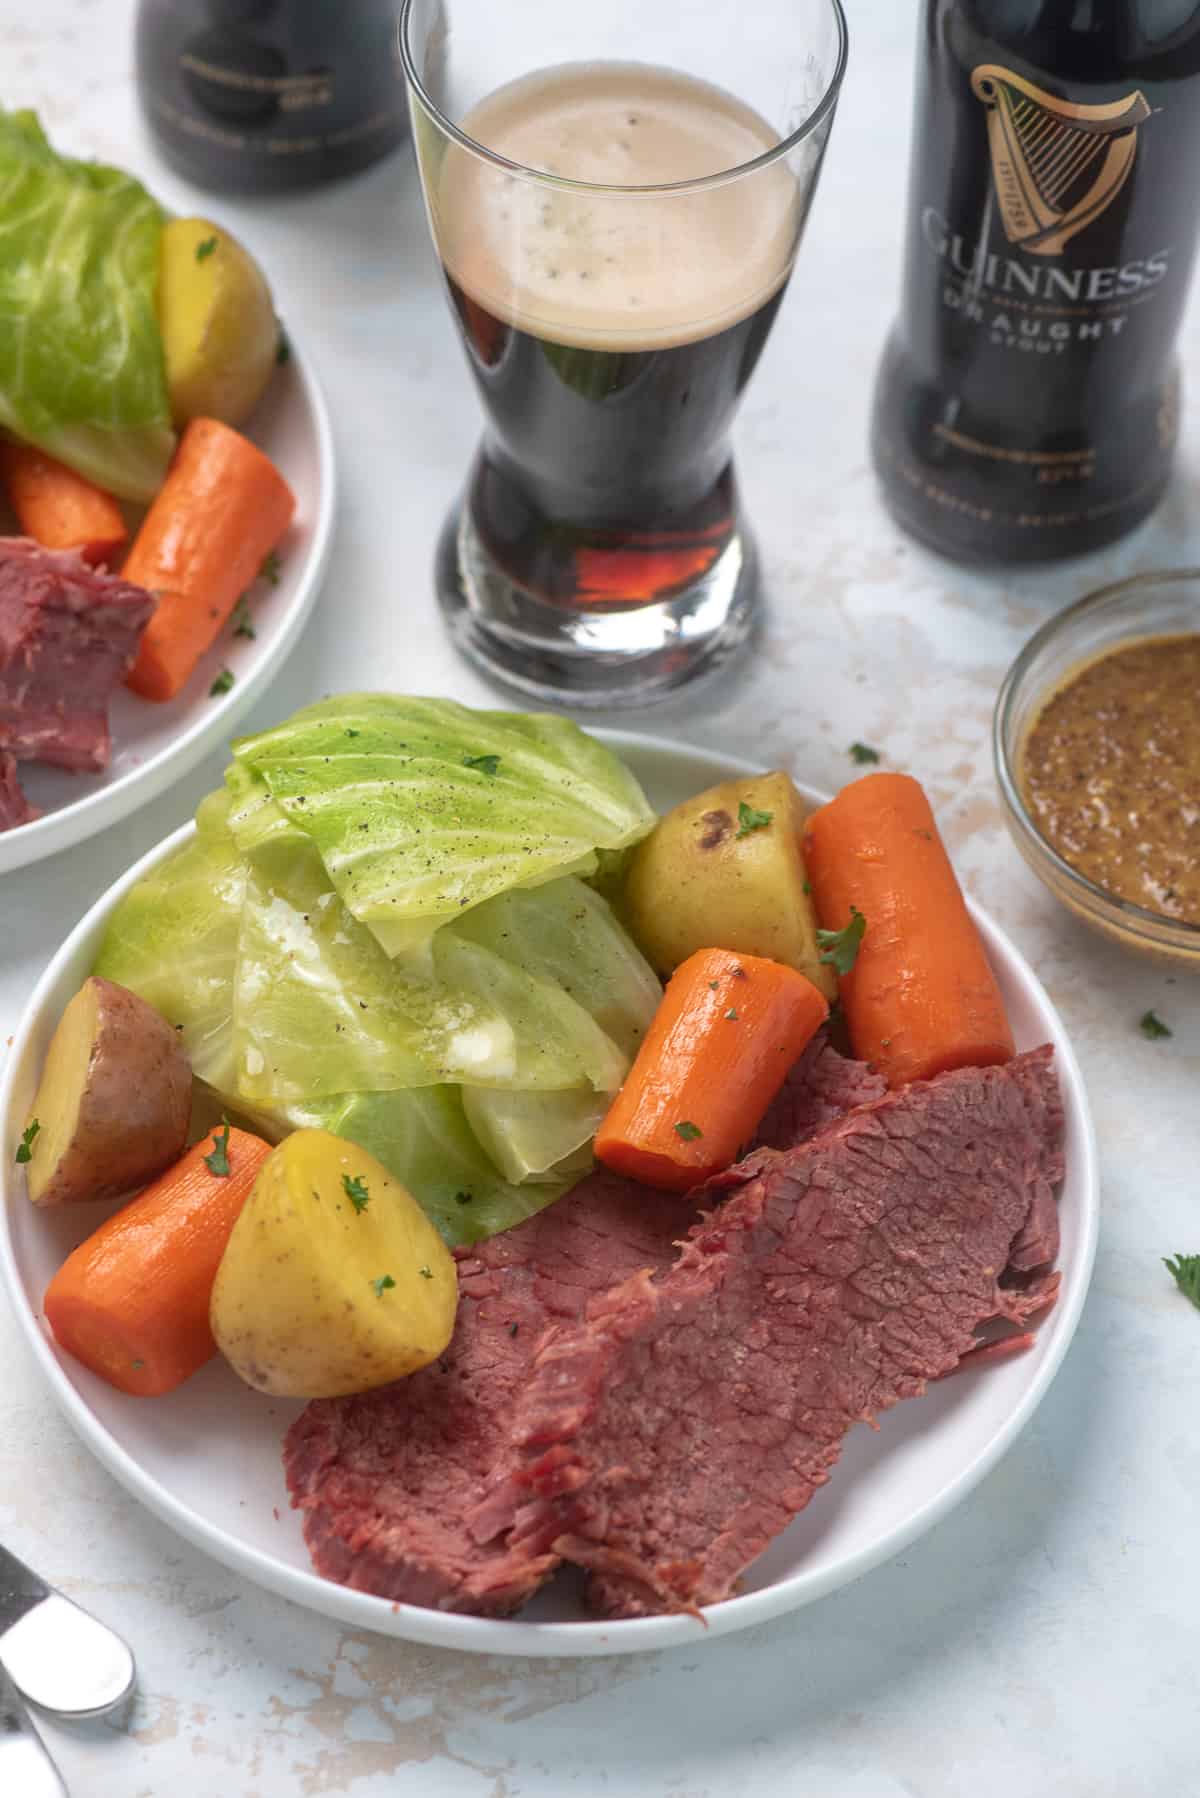 Slices of corned beef, cabbage, carrots, and potatoes on a white plate with a beer in the background.